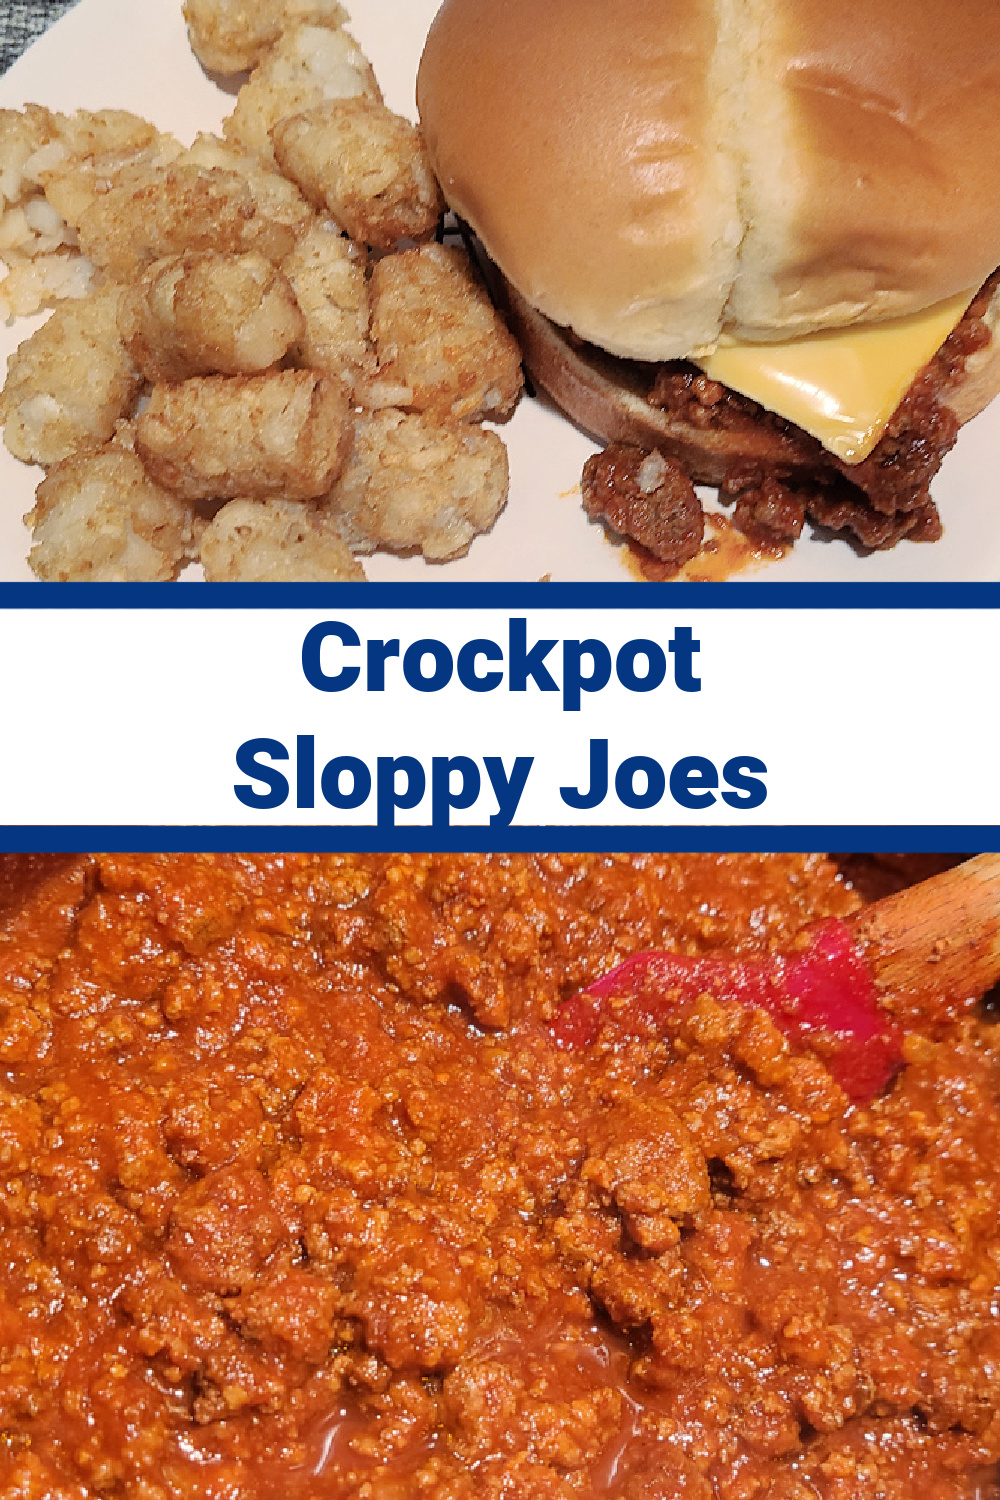 Crockpot Sloppy Joes are a tasty dinner and so easy to make! Make the sauce and let it all cook together with the meat in the crockpot! It really is easy to combine tomato sauce, ketchup, and some seasonings for an easy weeknight dinner! Ground beef helps to make a frugal dinner too!